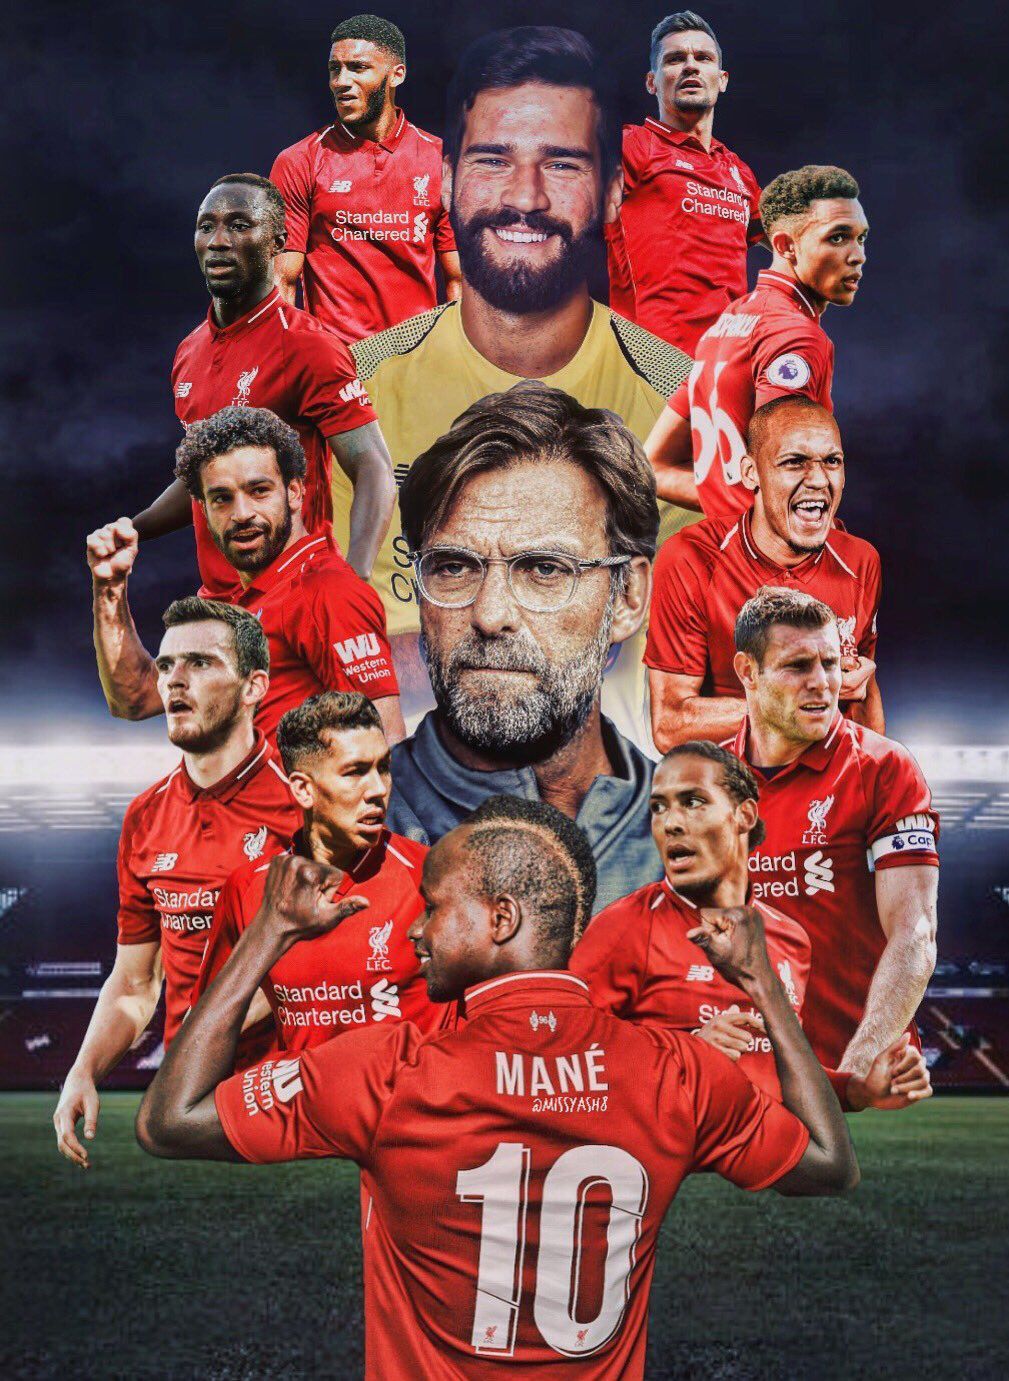 We are Liverpool